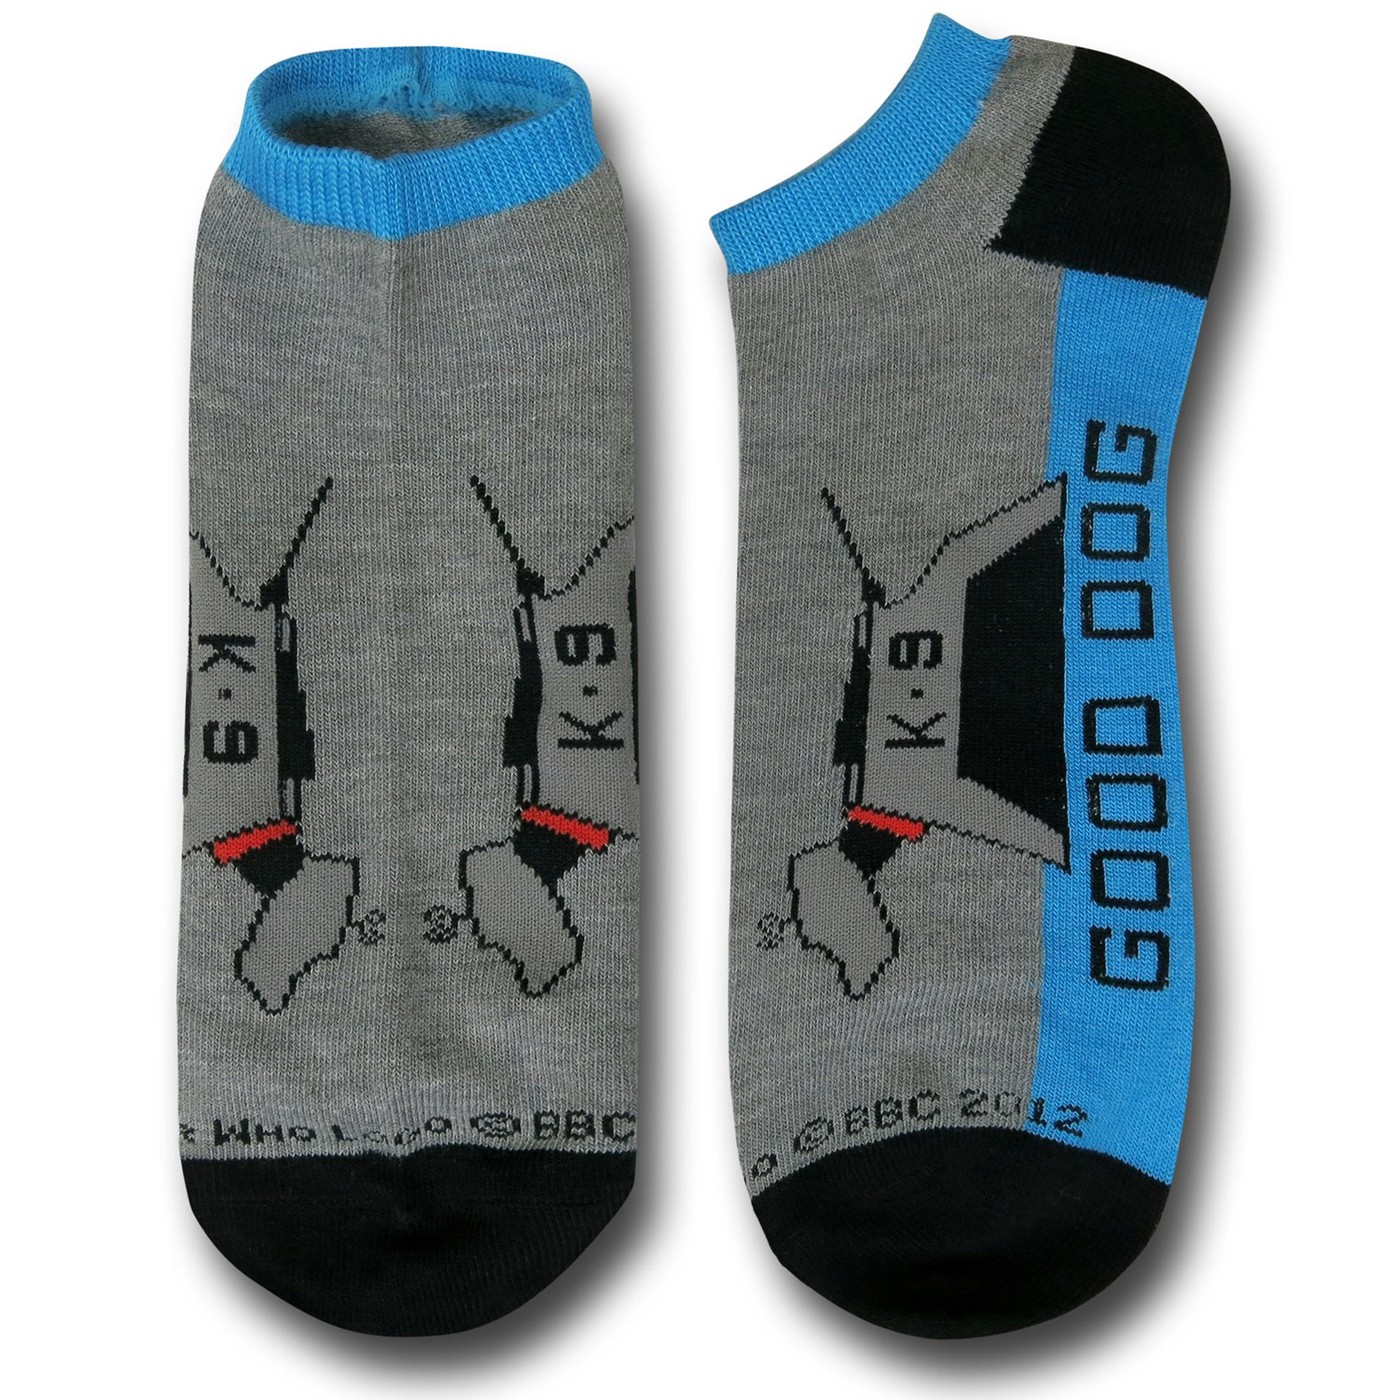 Doctor Who Lowcut Socks 3-Pack